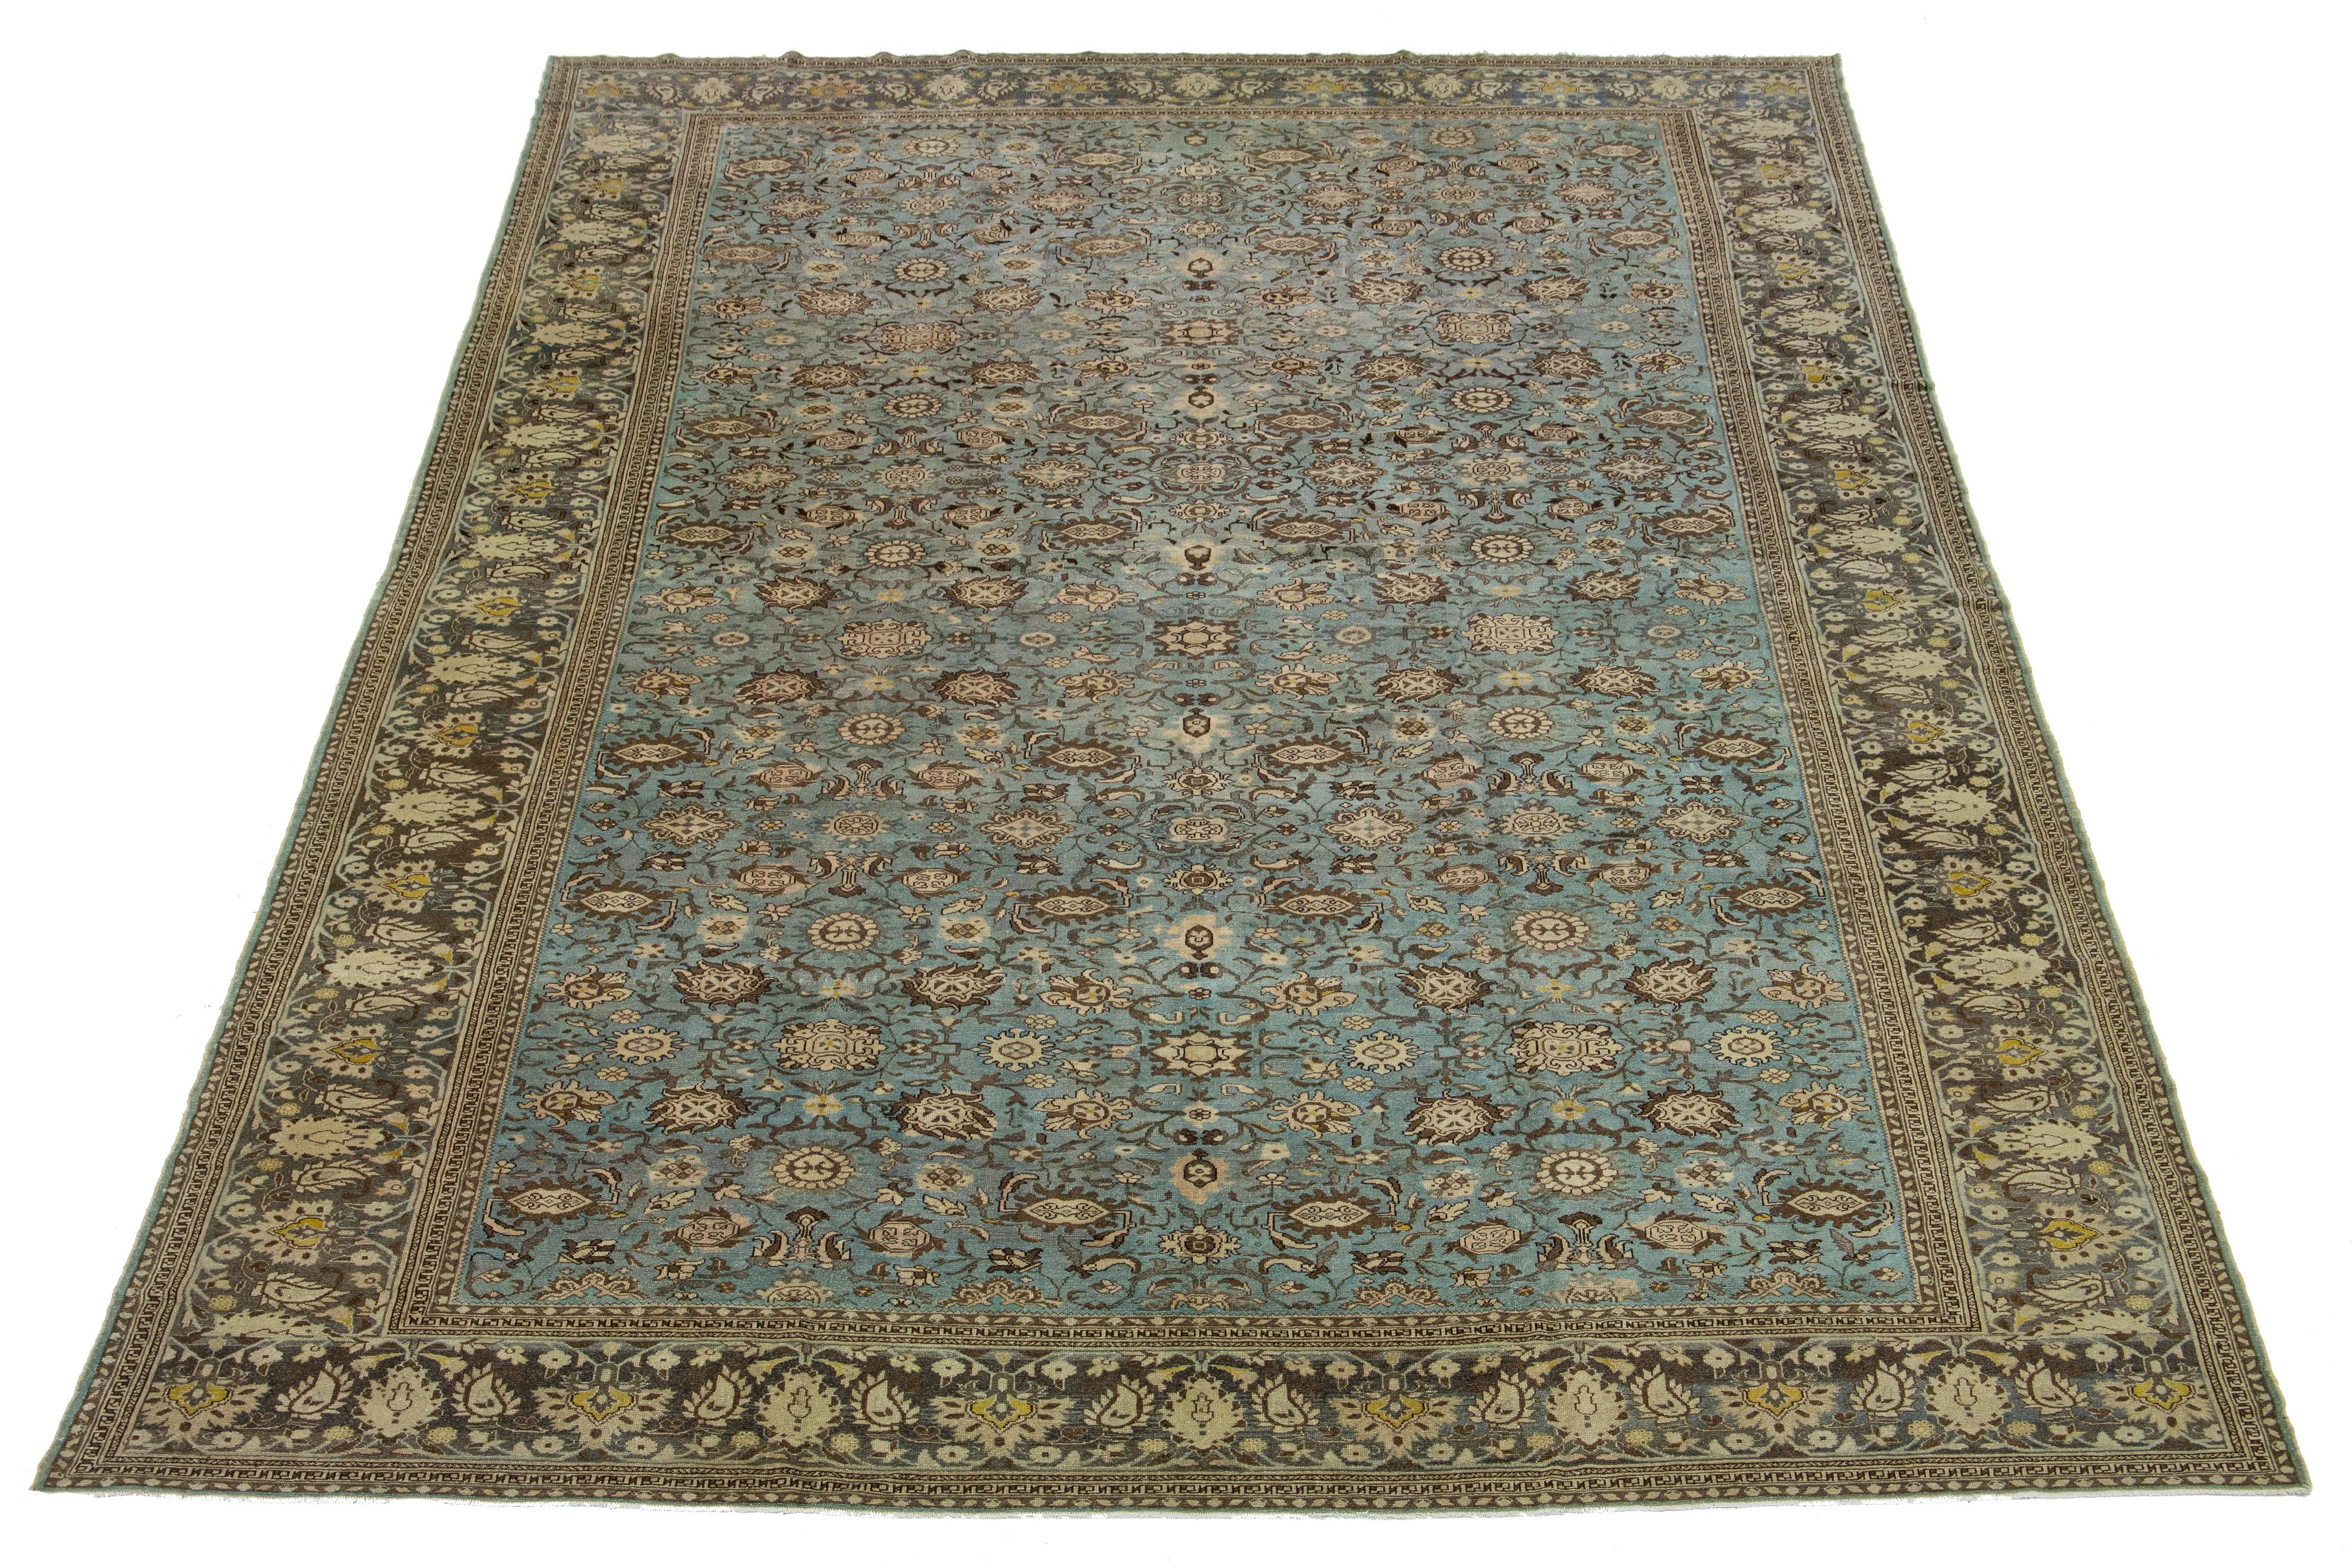 Beautiful antique Malayer hand-knotted wool rug with a blue field. This Persian piece has a gray frame with yellow, beige, and brown accents in a gorgeous all-over floral design.

This rug measures: 11'8